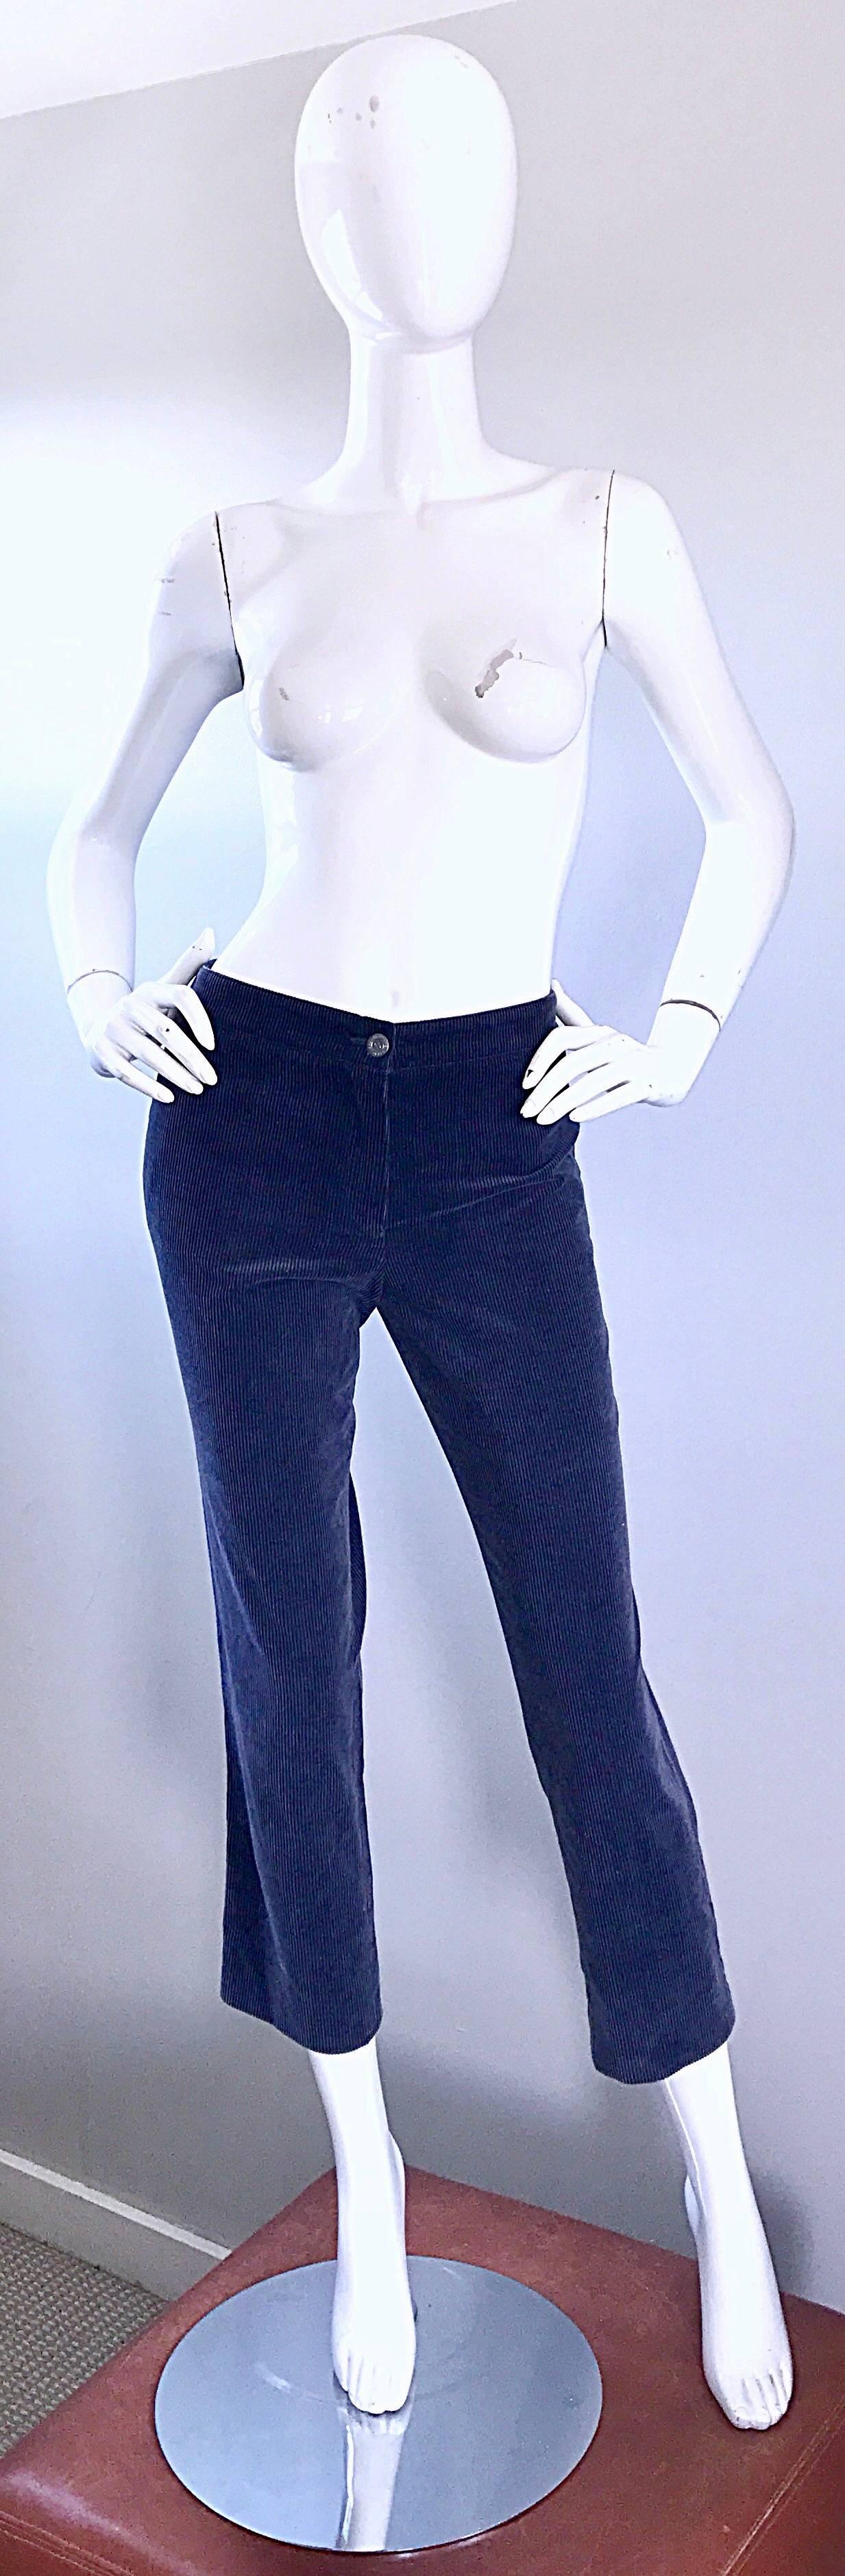 Chic CHANEL light navy blue corduroy mid rise slim fit Capri pants from the 2003 collection! Flattering slim fit looks amazing on! One pocket on the rear. Zipper fly with Chanel embossed button on the waistband. Can easily be dressed up or down.